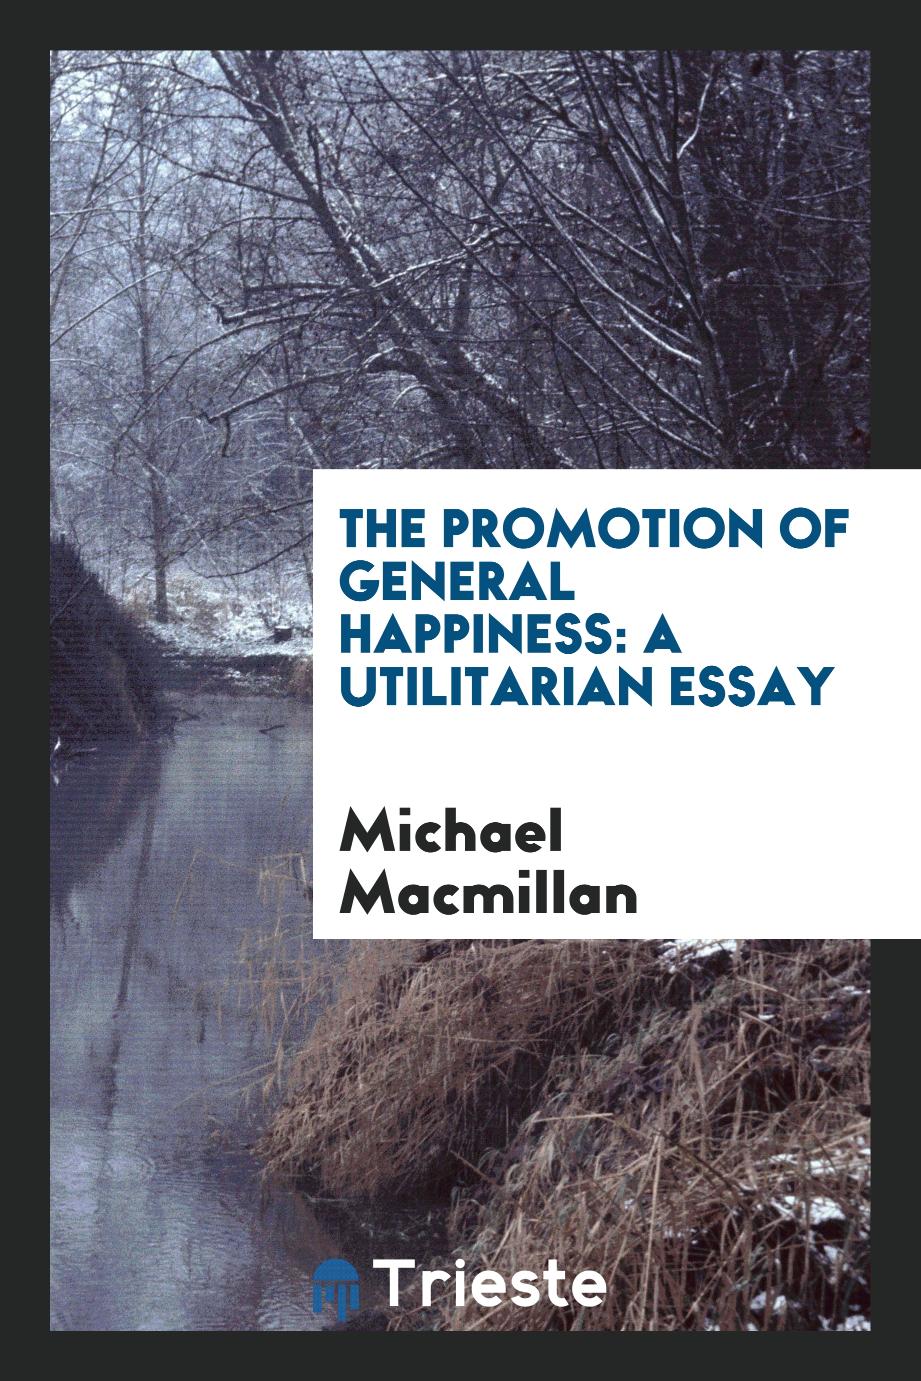 The Promotion of General Happiness: A Utilitarian Essay